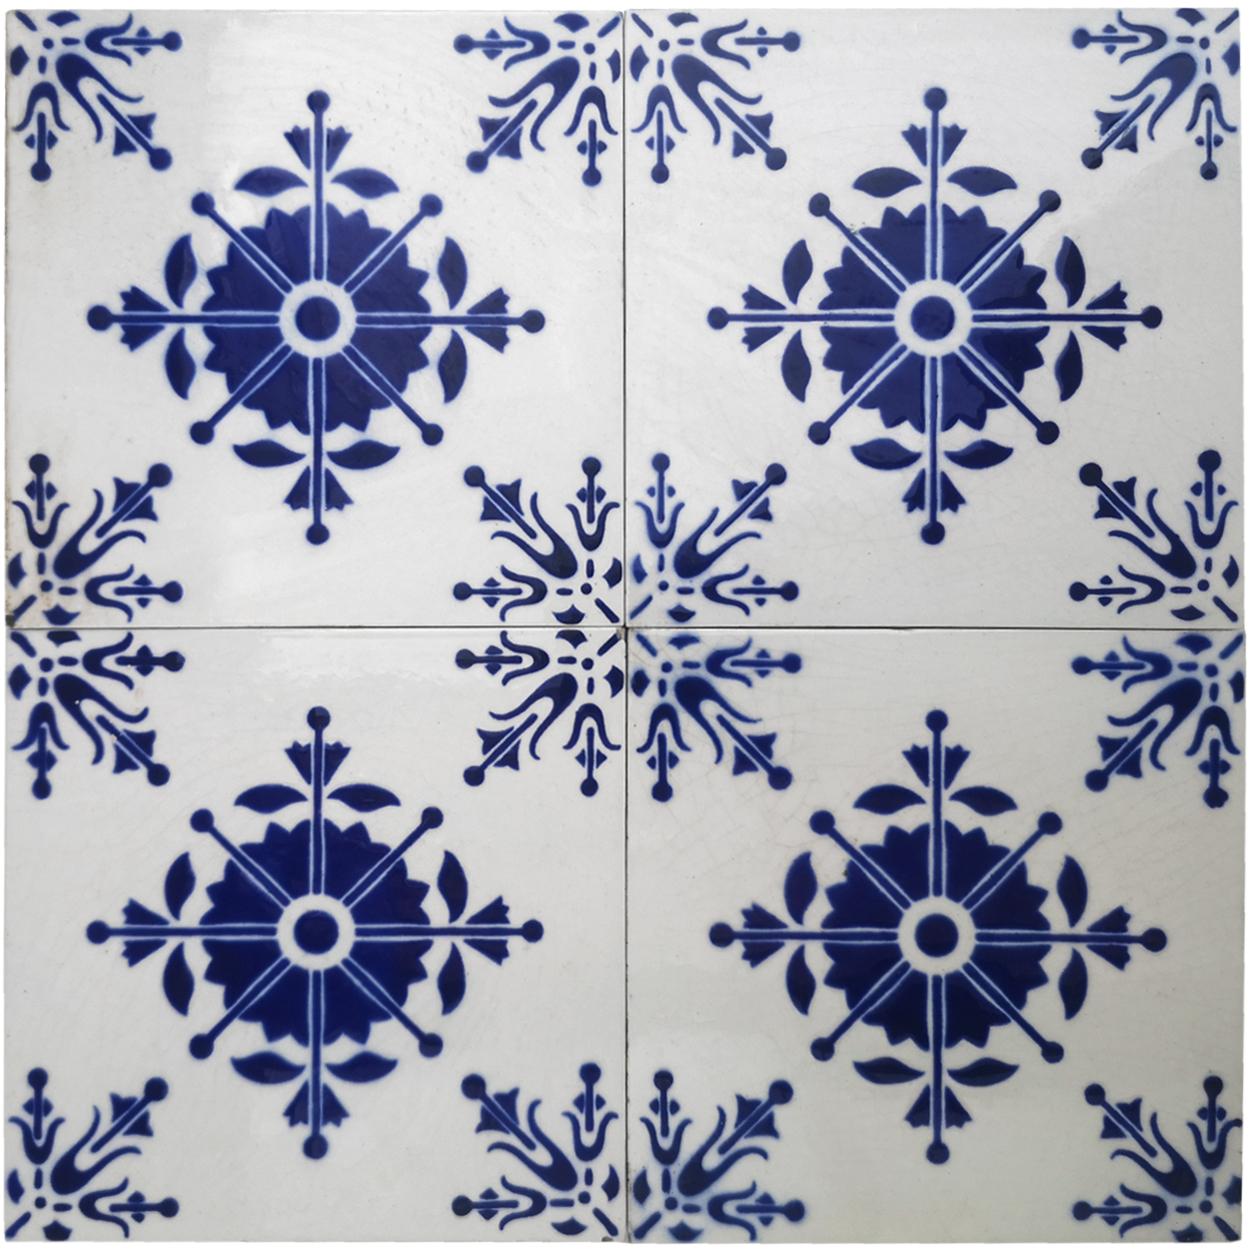 This is an amazing set of antique Art Nouveau handmade tiles in a rich blue color, made in Belgium, 1930s. 
These tiles would be charming displayed on easels, framed or incorporated into a custom tile design.

Please note that the price is per